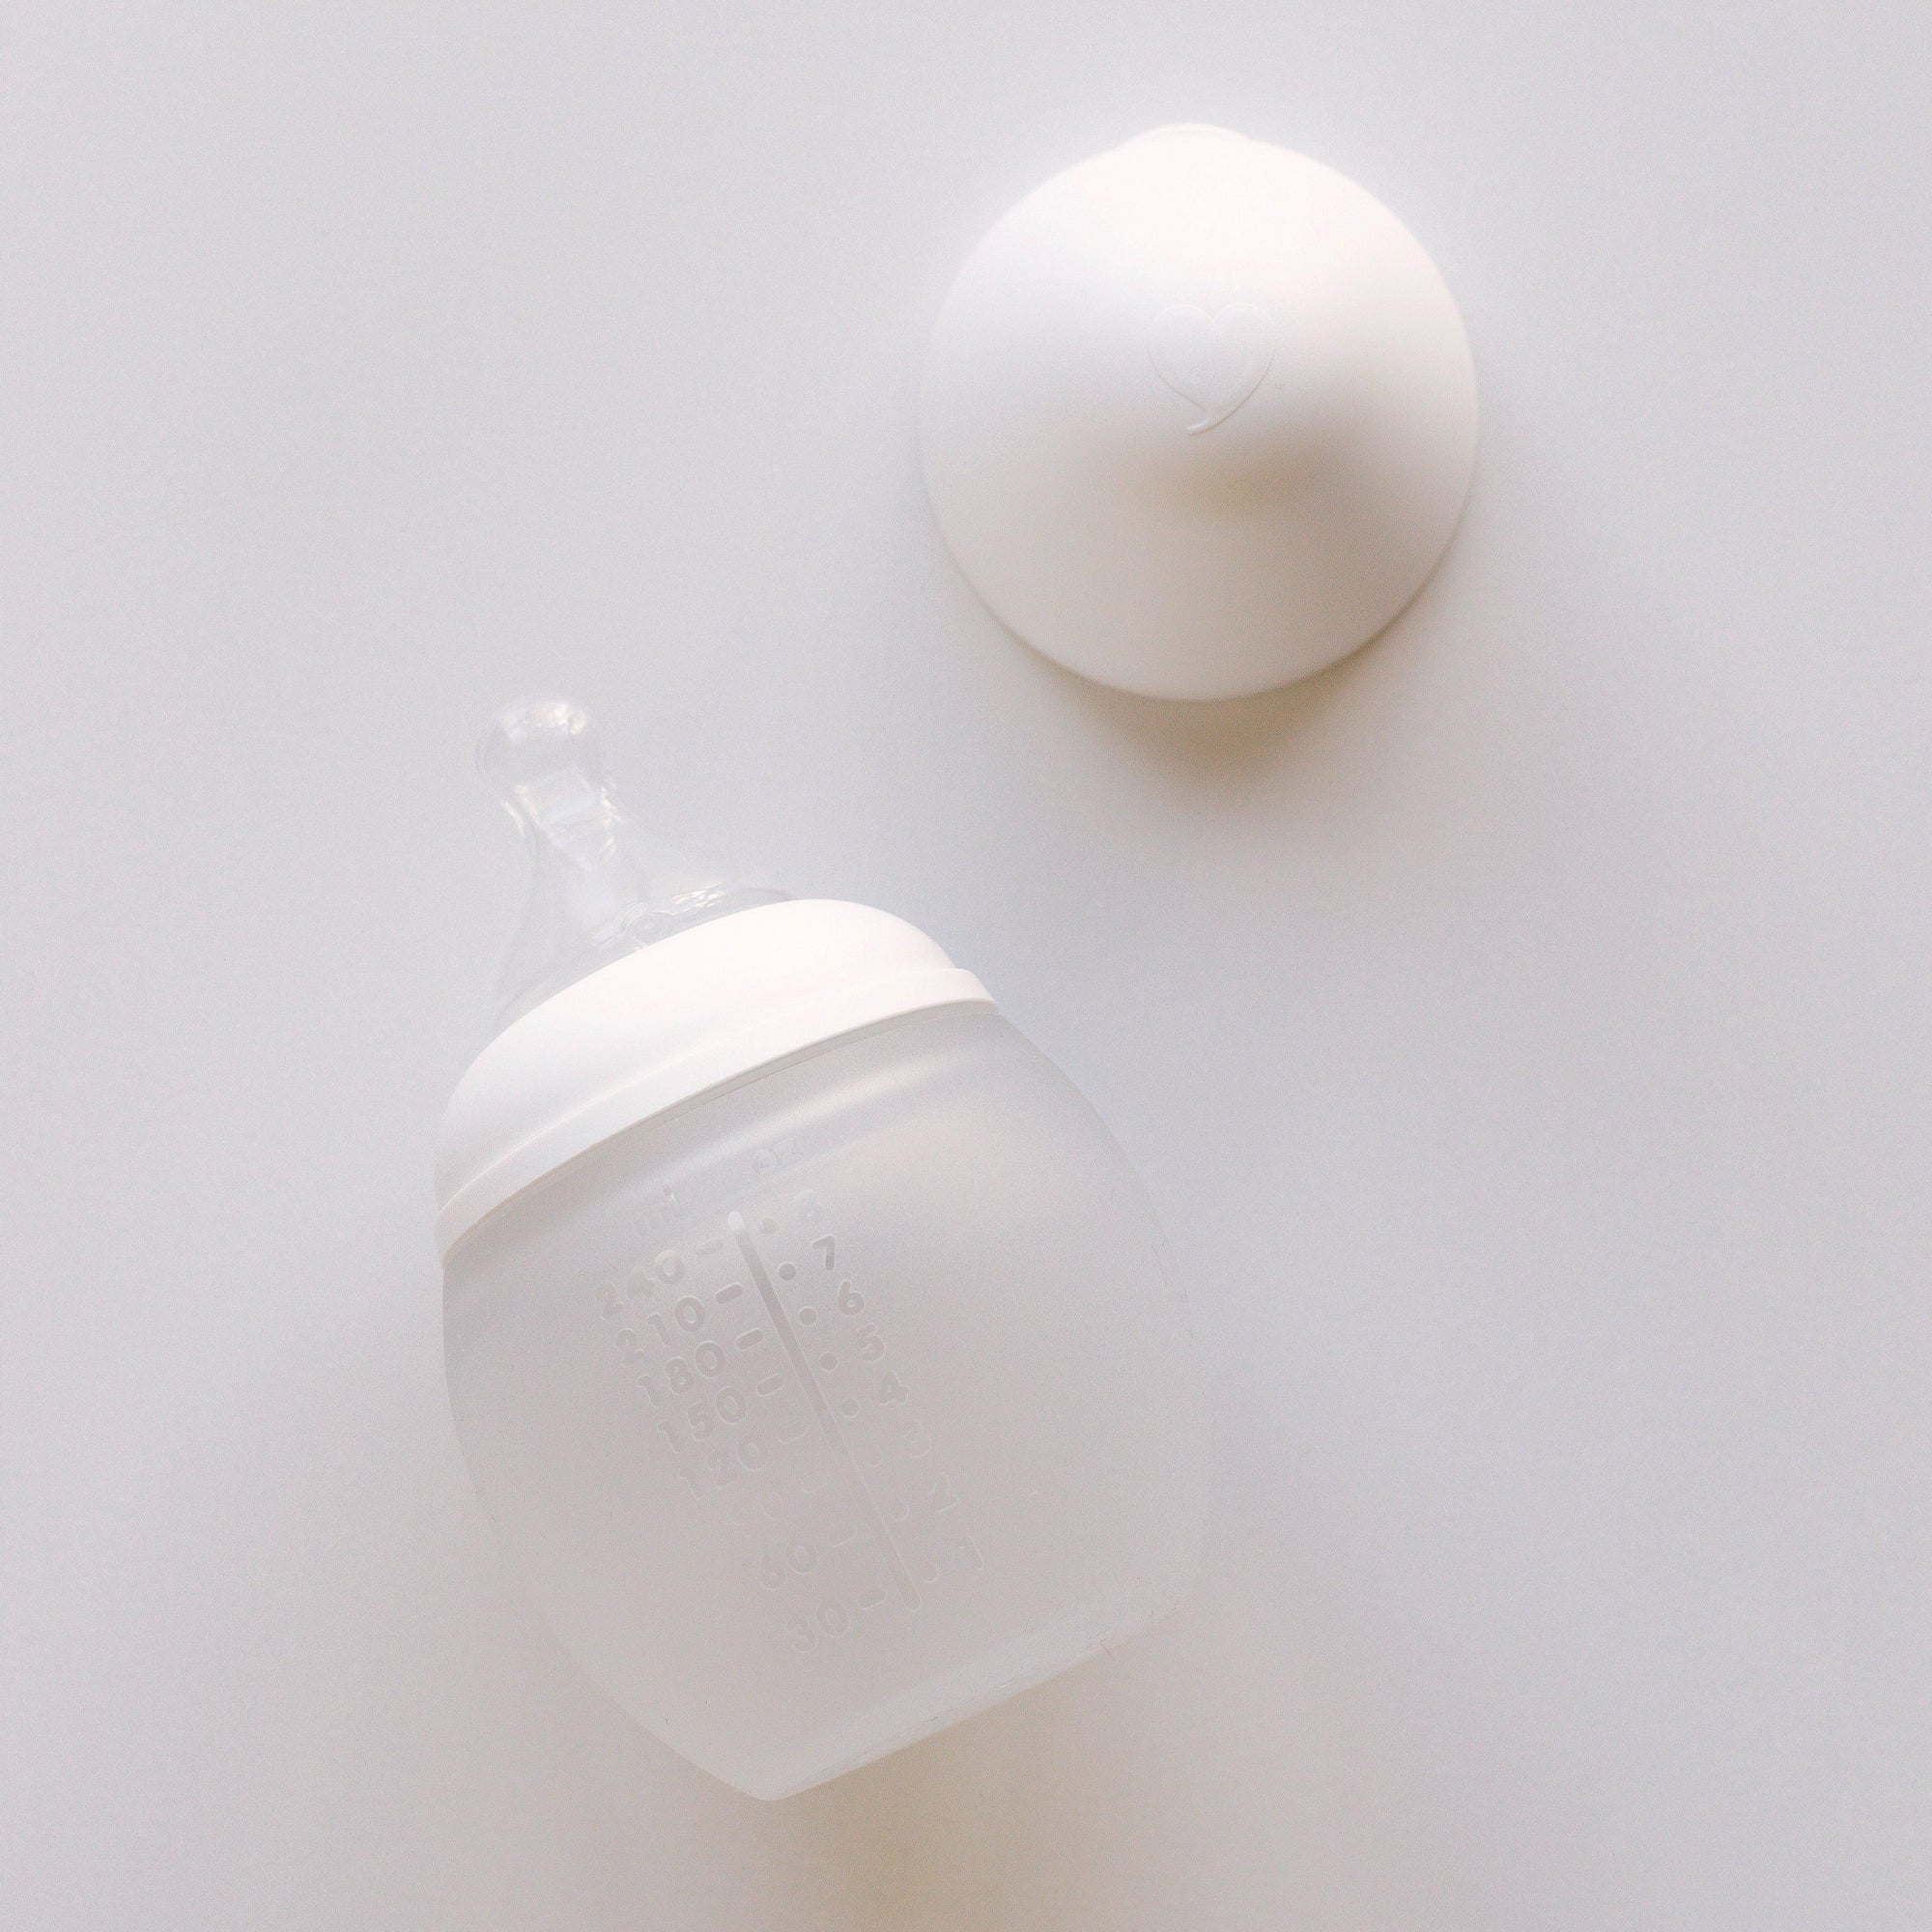 A milk BibRond bottle by Elhée France laying on a white surface.